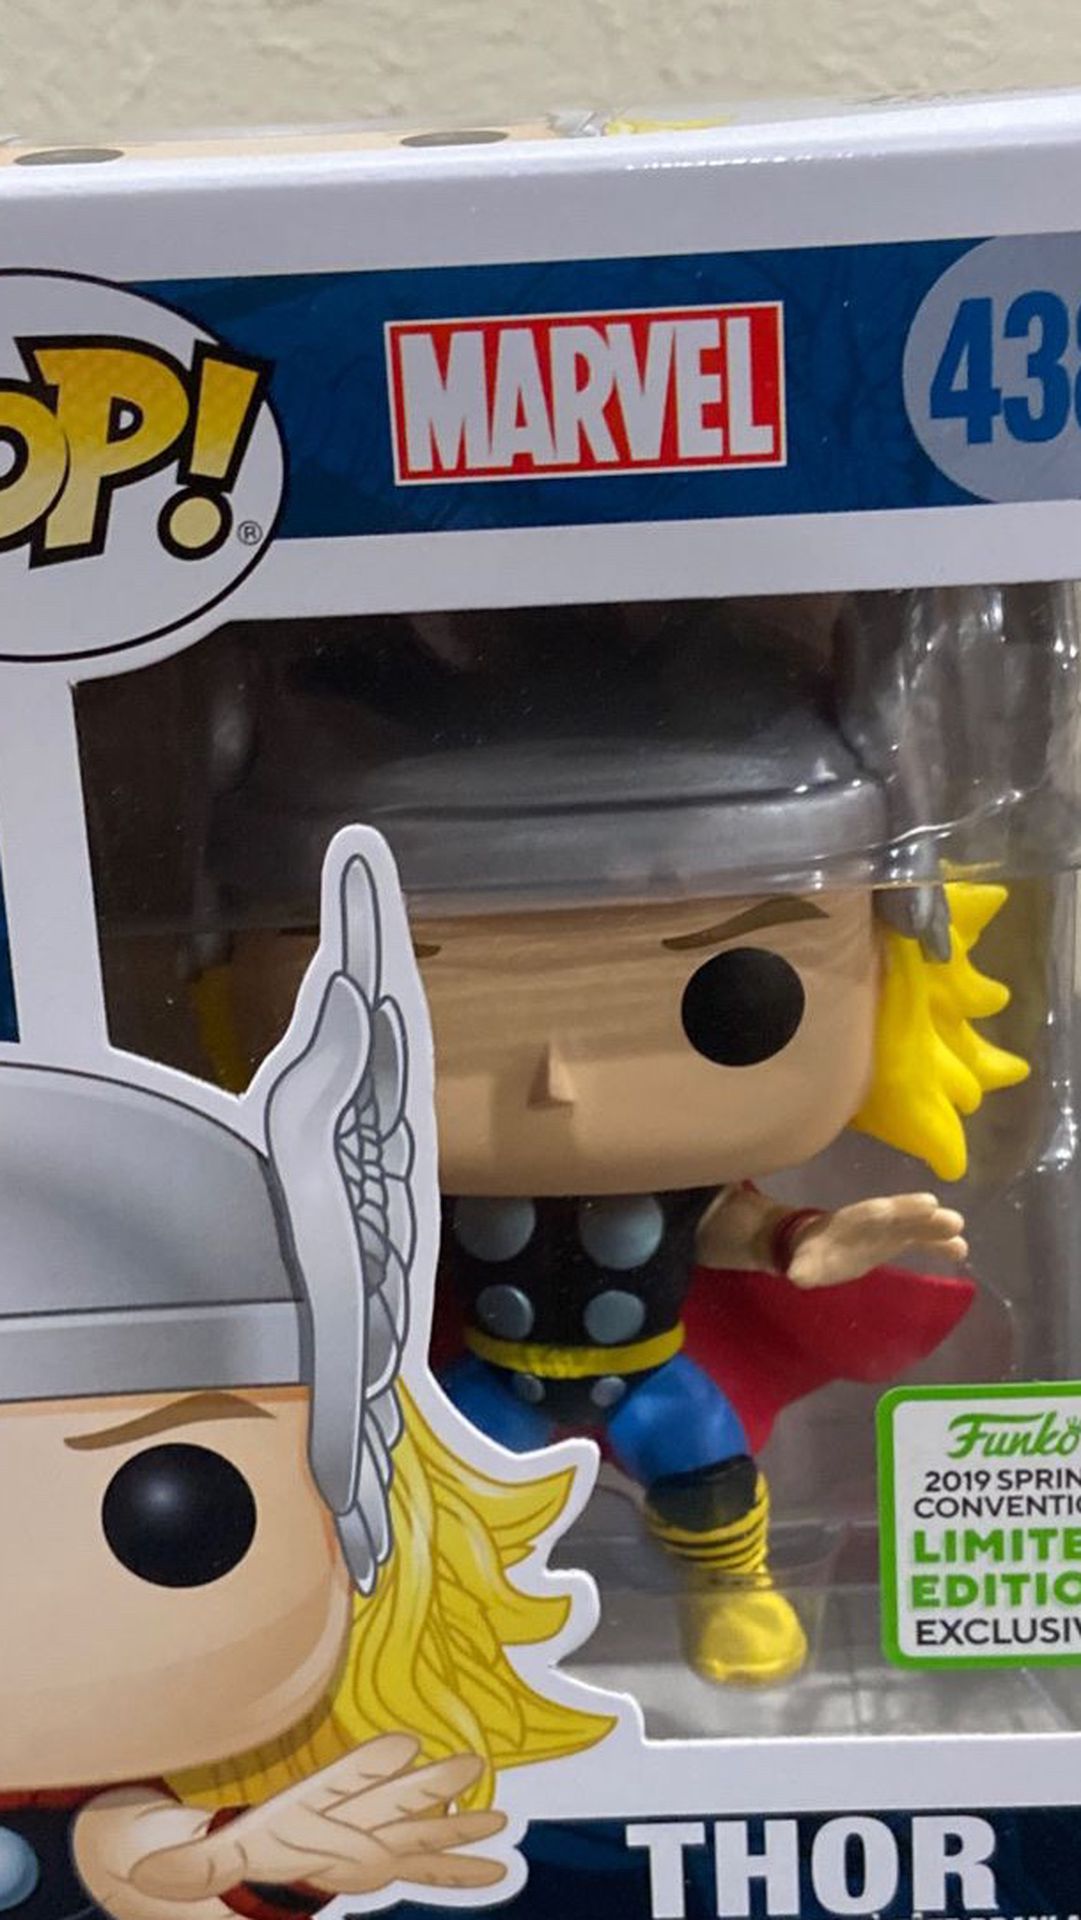 THOR marvel pop 438. Funko 2019 Convention. LIMITED EDITION EXCLUSIVE